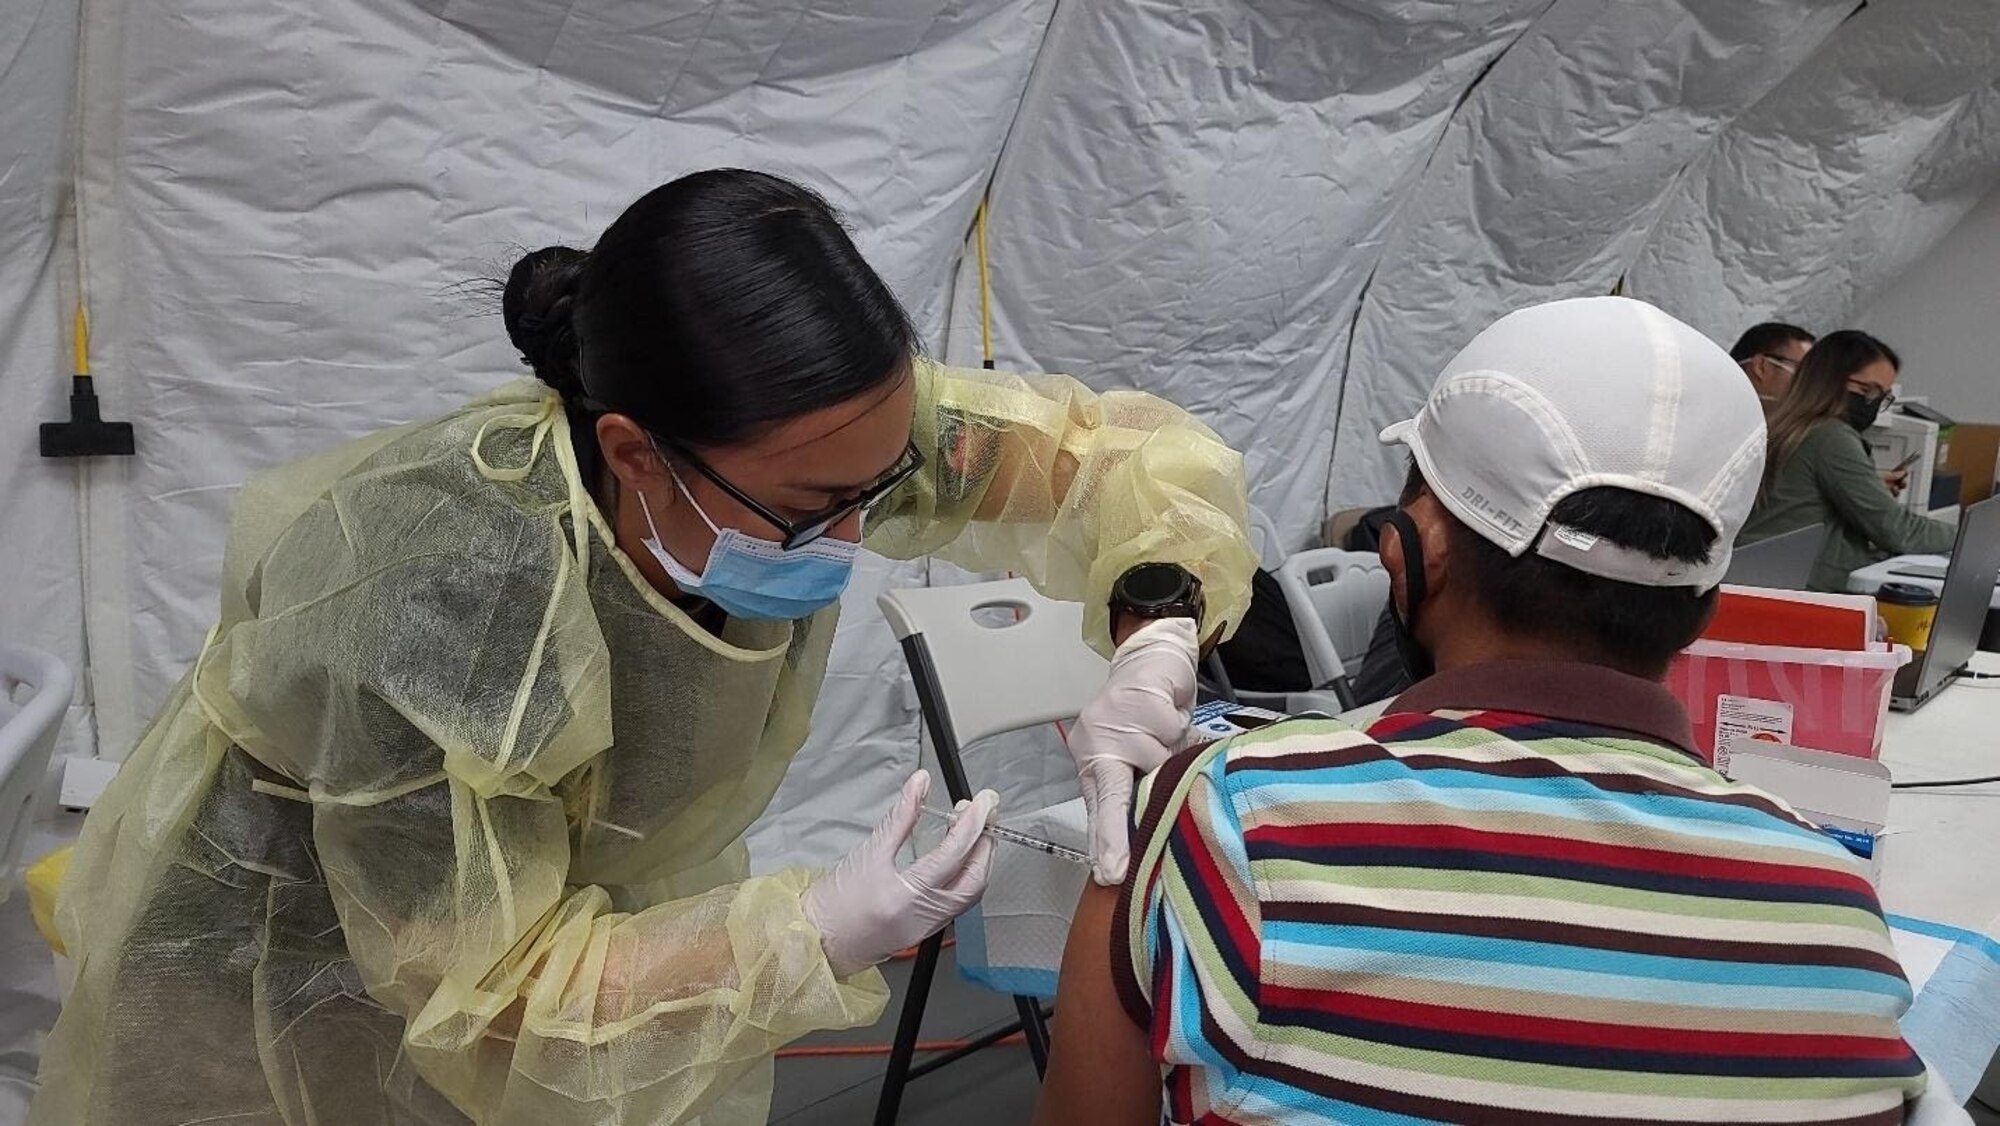 Sgt. Franchesca Esteban,  assigned to 25th Infantry Division, administers a COVID-19 Vaccine in support of the Commonwealth Healthcare Corporation (CHCC) COVID-19 Vaccination team at the Medical Care and Treatment Site (MCATS).